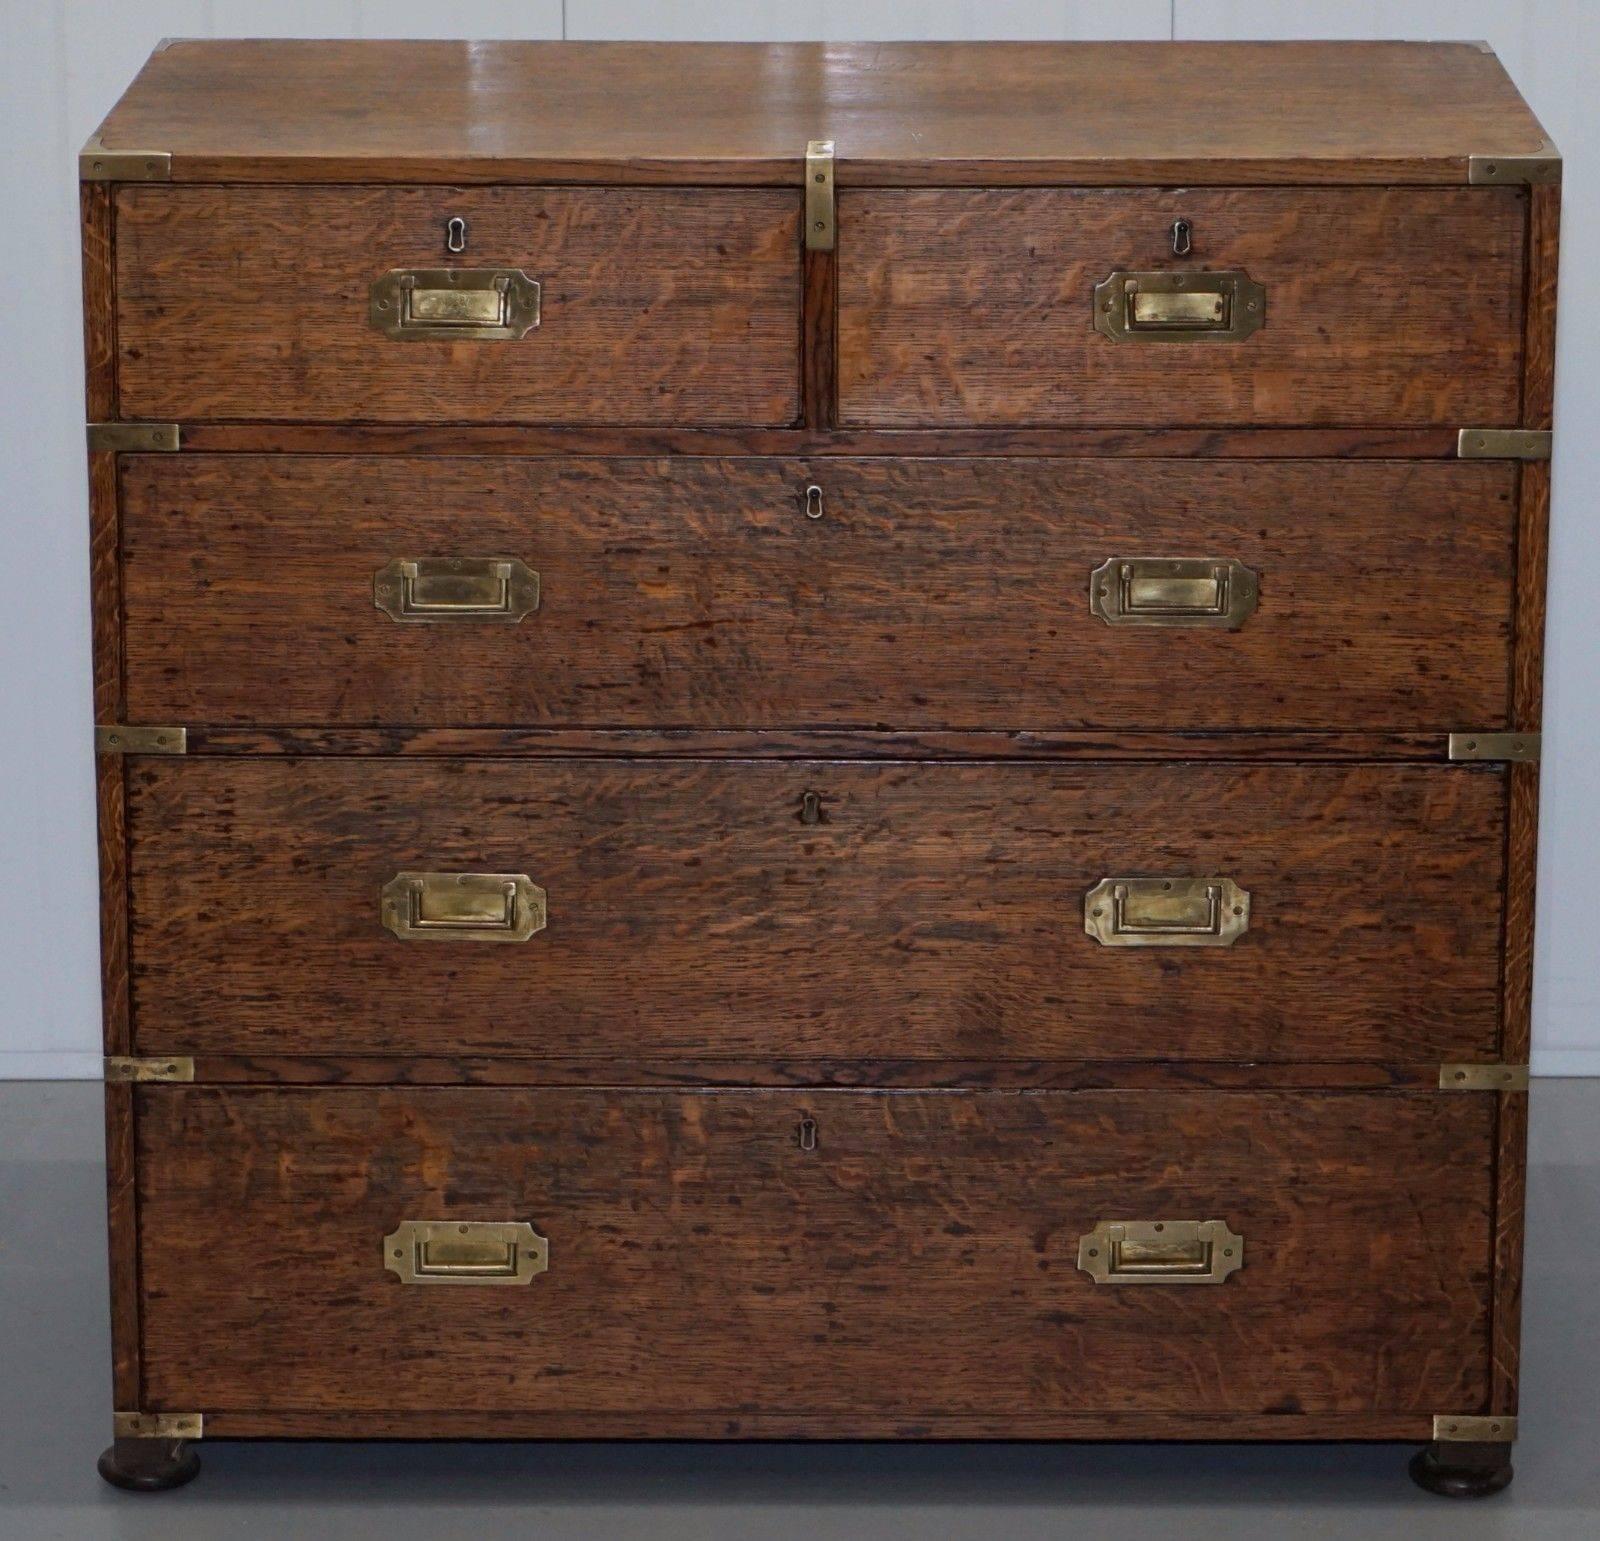 Lovely original period Campaign Military chest of drawers in solid oak

Please note the delivery fee listed is just a guide, for an accurate quote please send me your postcode and I’ll price it up for you

A genuine and very well used old set of